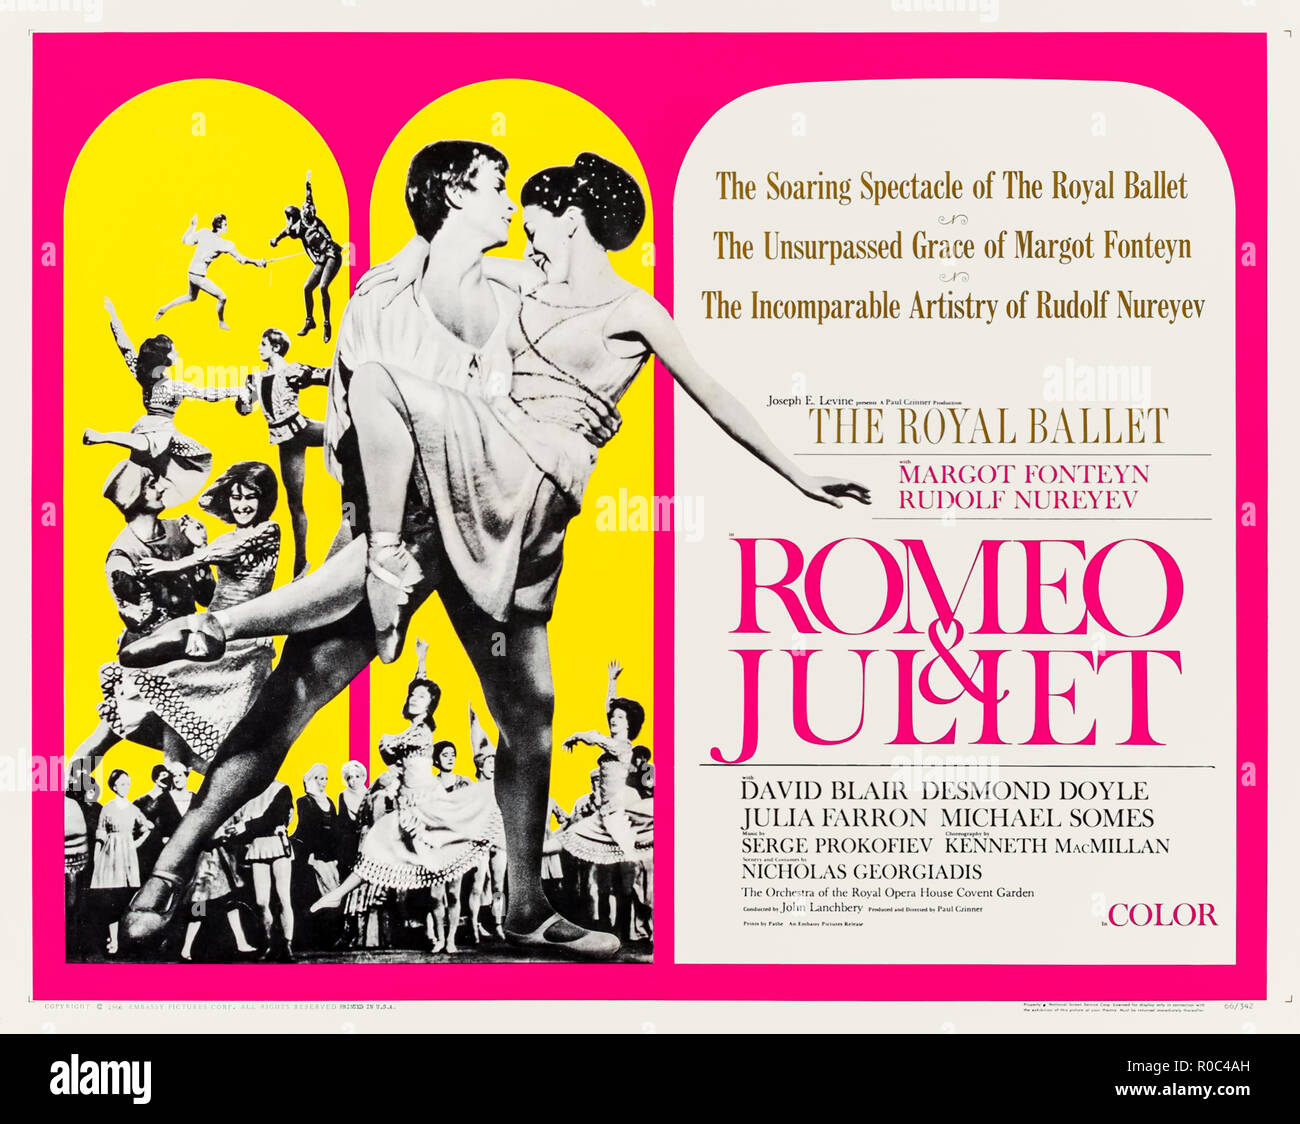 Romeo and Juliet (1966) directed by Paul Czinner and starring Margot Fonteyn, Rudolf Nureyev and David Blair. Recording of a ballet adaptation of Shakespeare’s play featuring the music of Serge Prokofiev filmed in 1966 at the Royal Opera House, London. Stock Photo